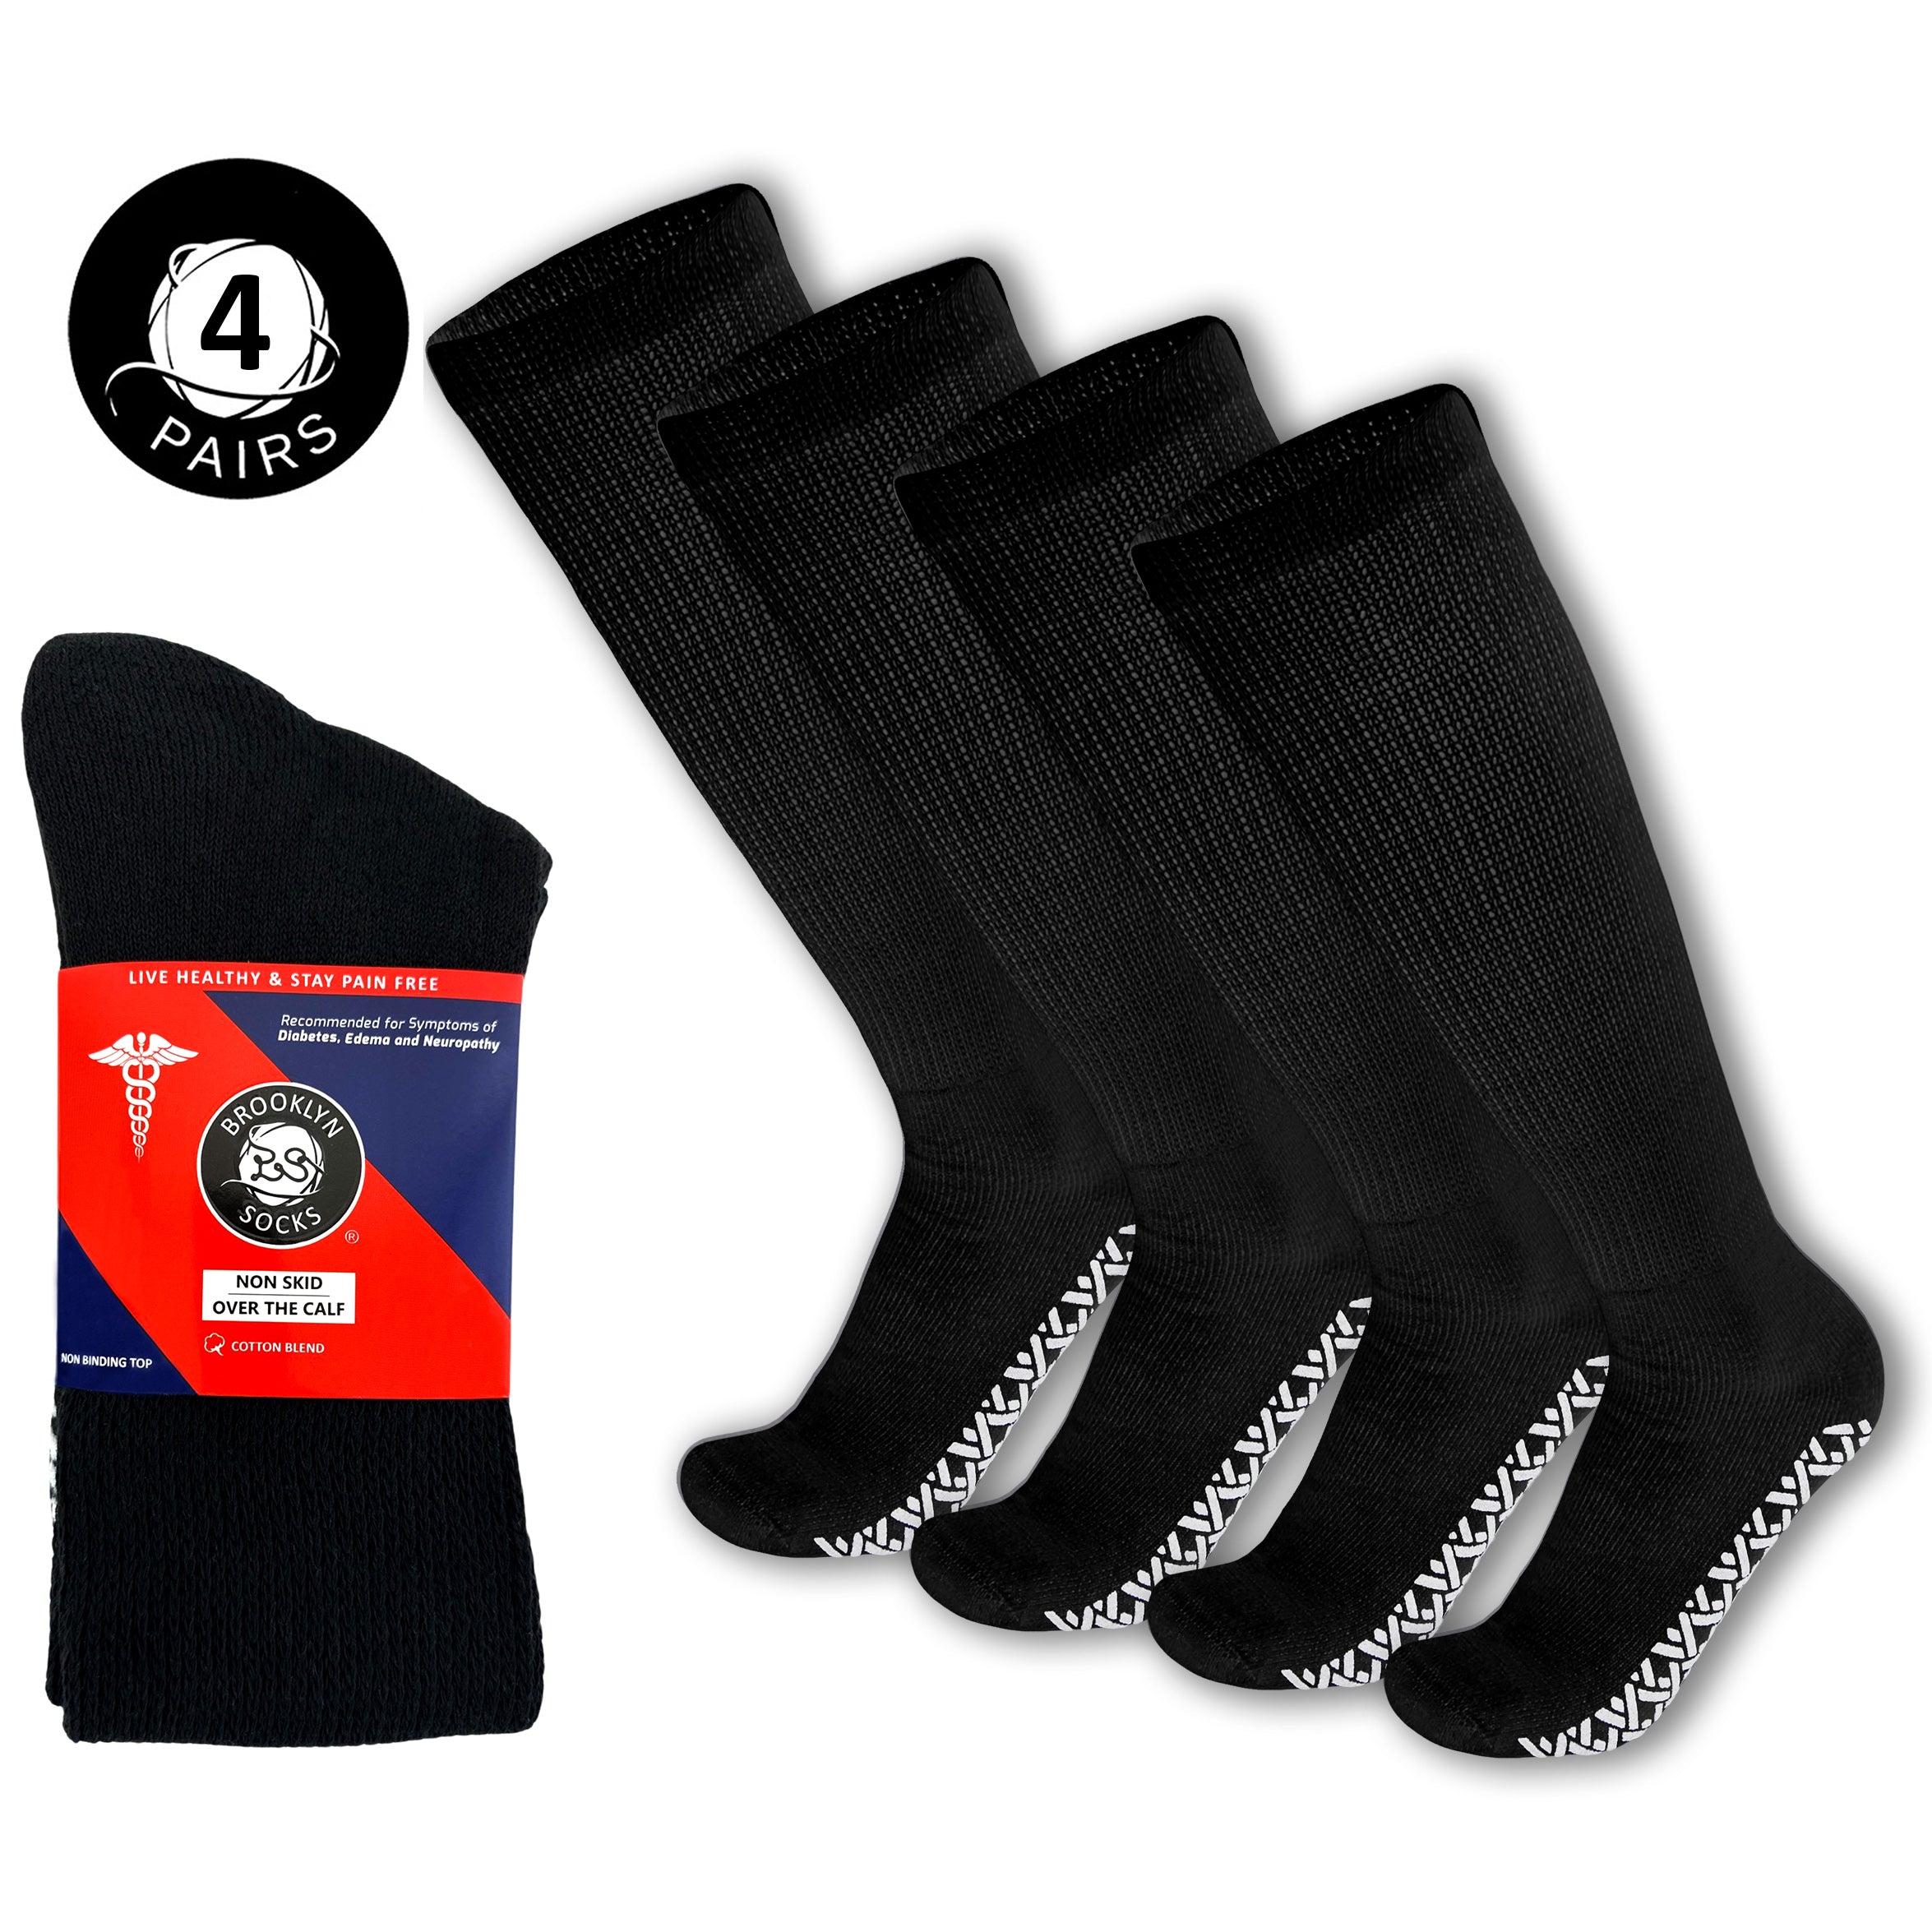 4 Pairs of Non-Skid Over-The-Calf Diabetic Cotton Socks with Non Binding Top